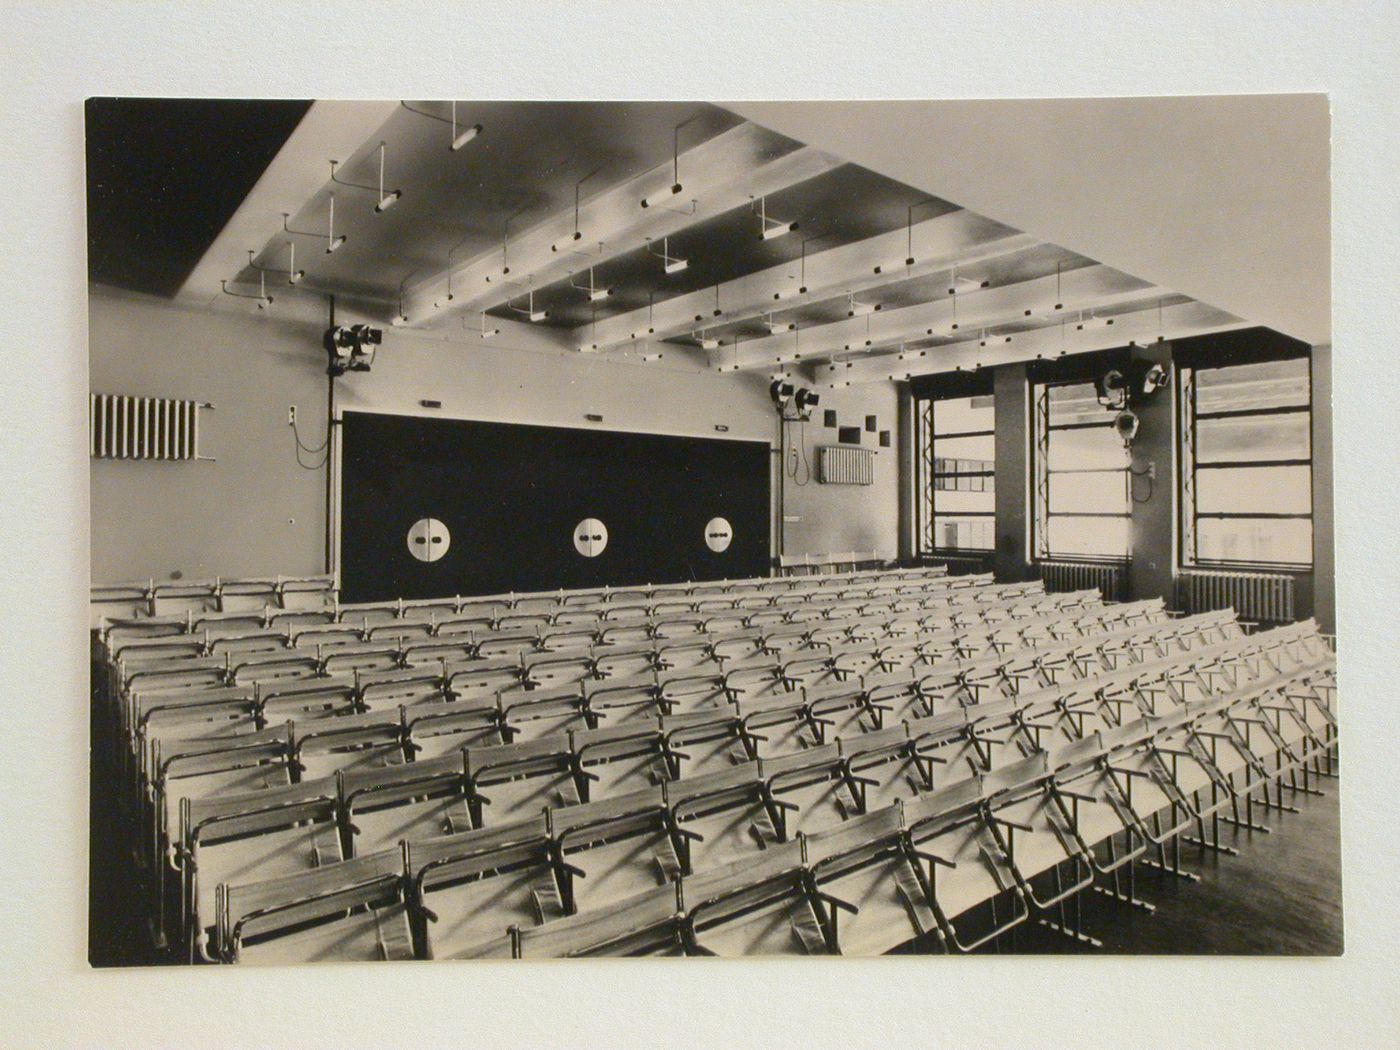 Interior view of the Bauhaus building showing the auditorium with seating designed by Marcel Breuer, Dessau, Germany